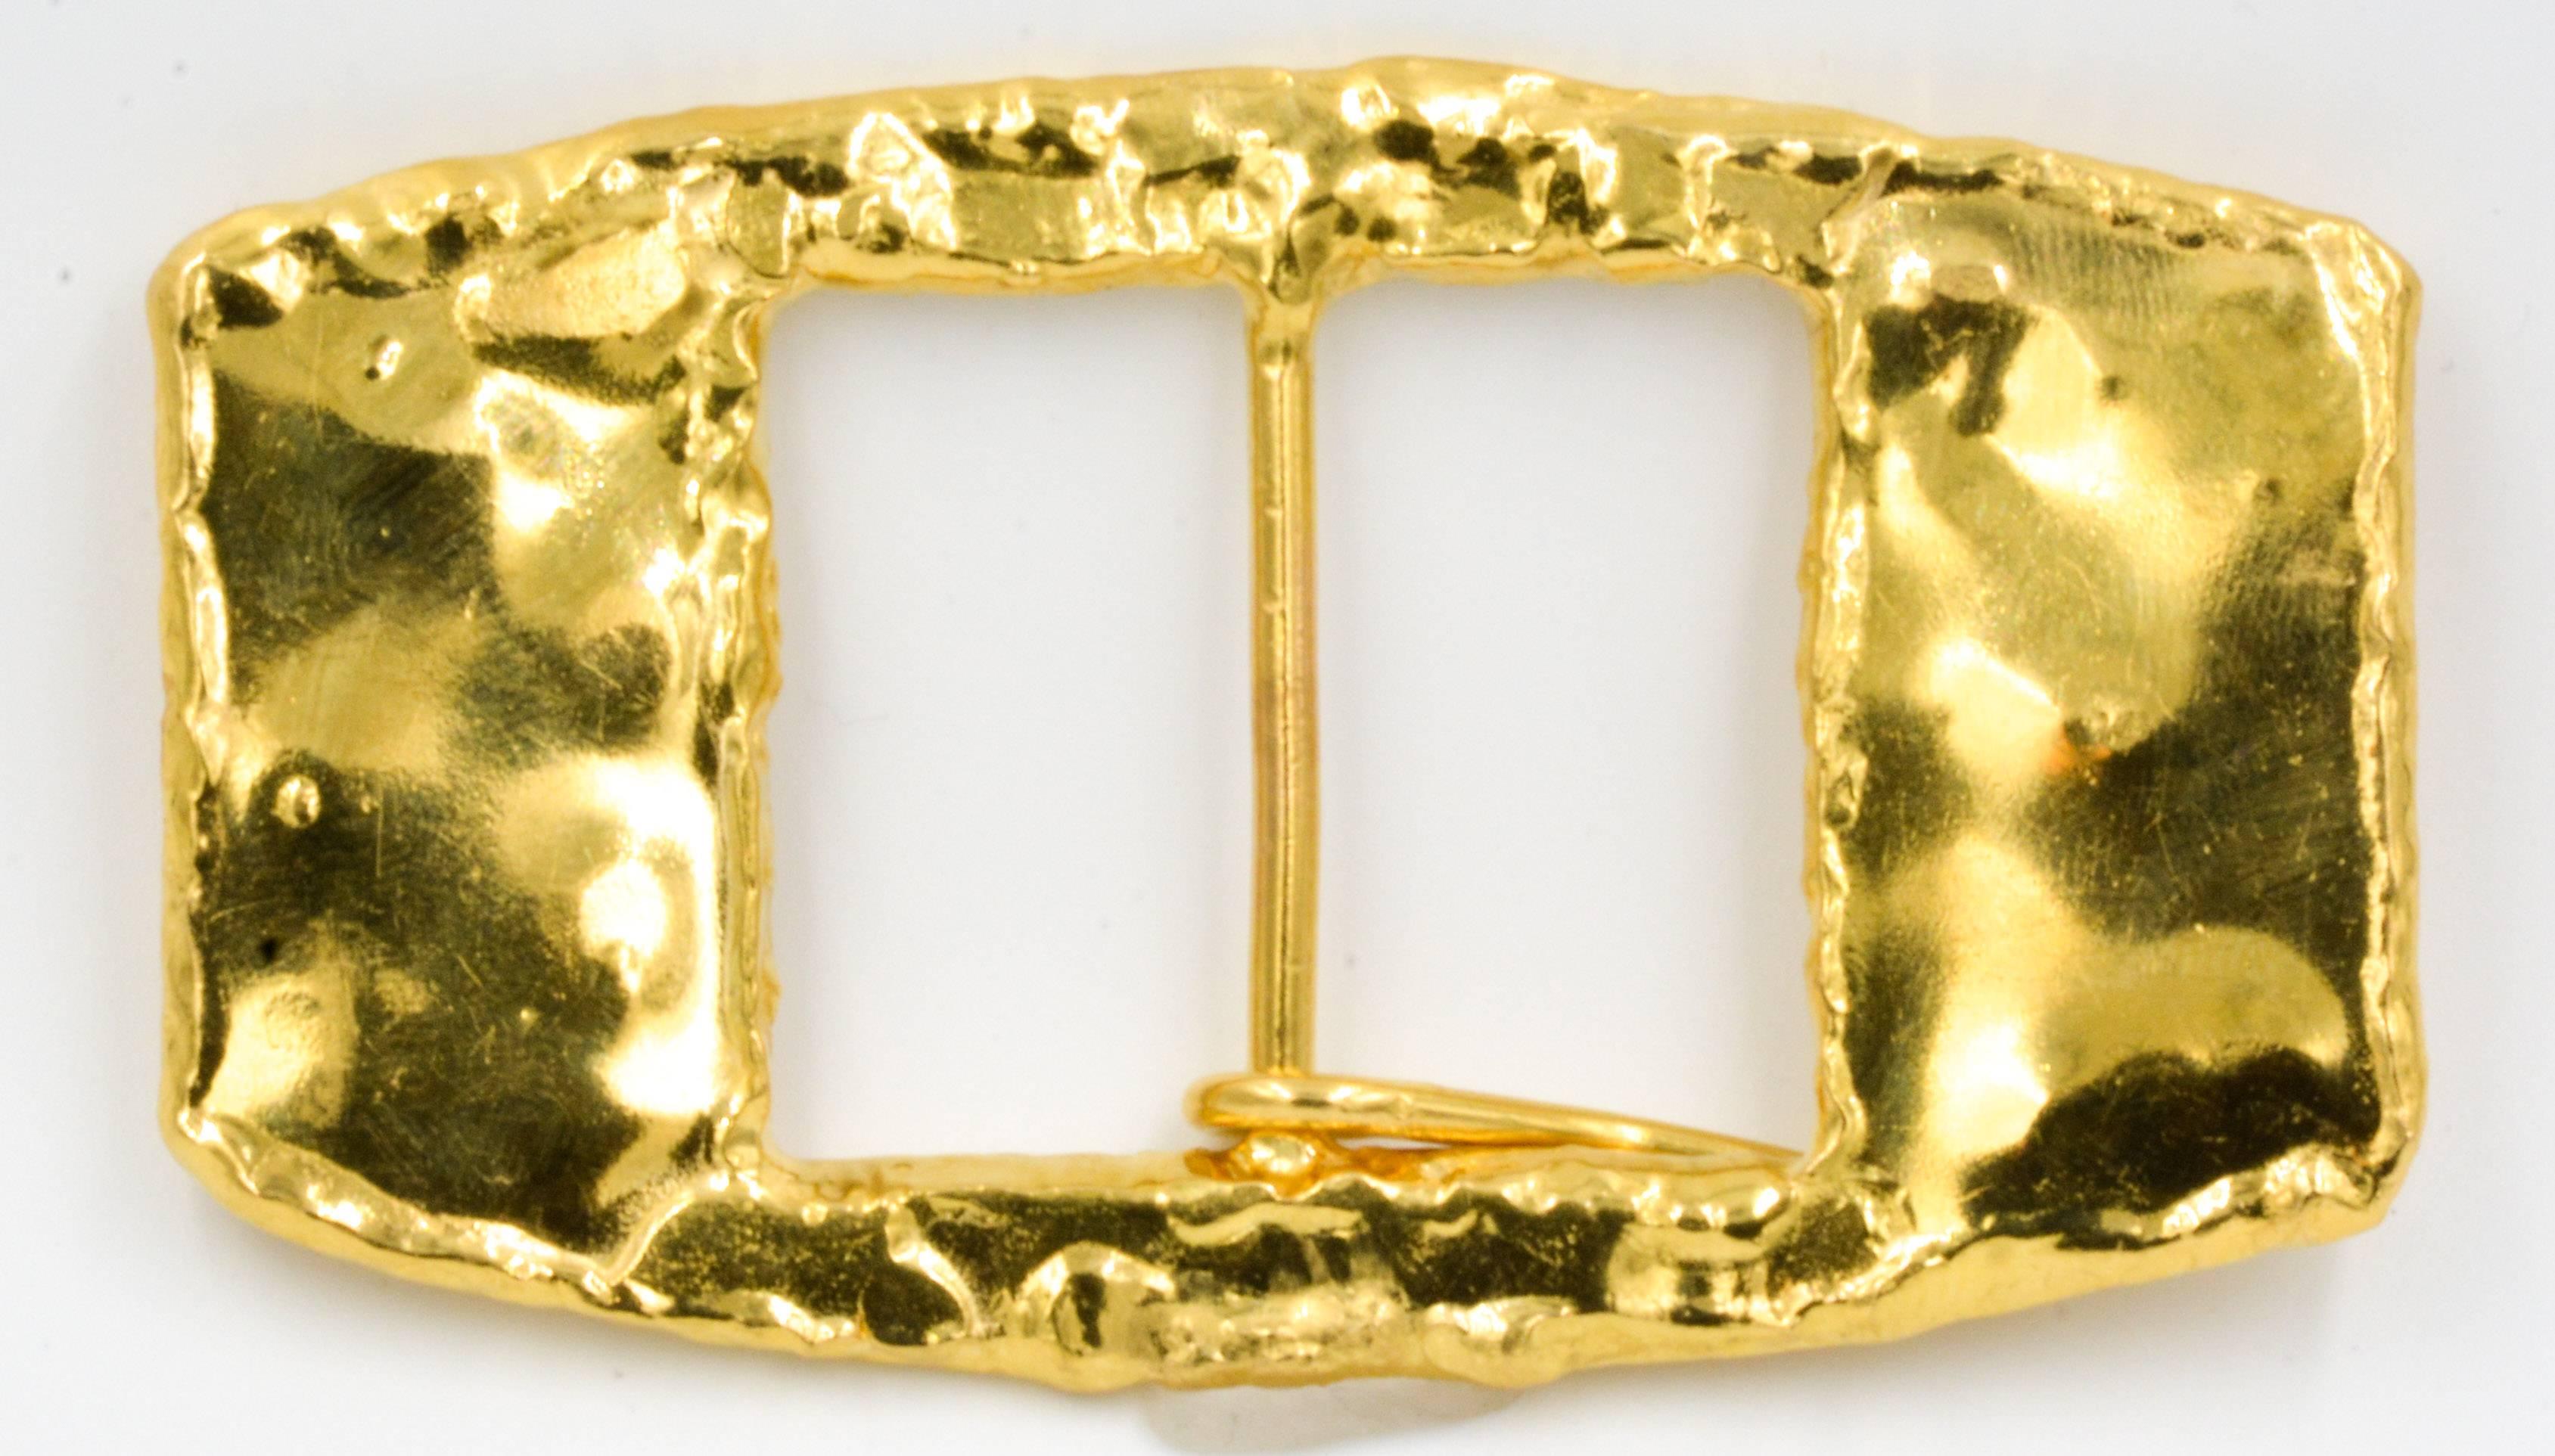 This classic Jean Mahie buckle is fashioned from 22kt yellow gold and features the quintessential 